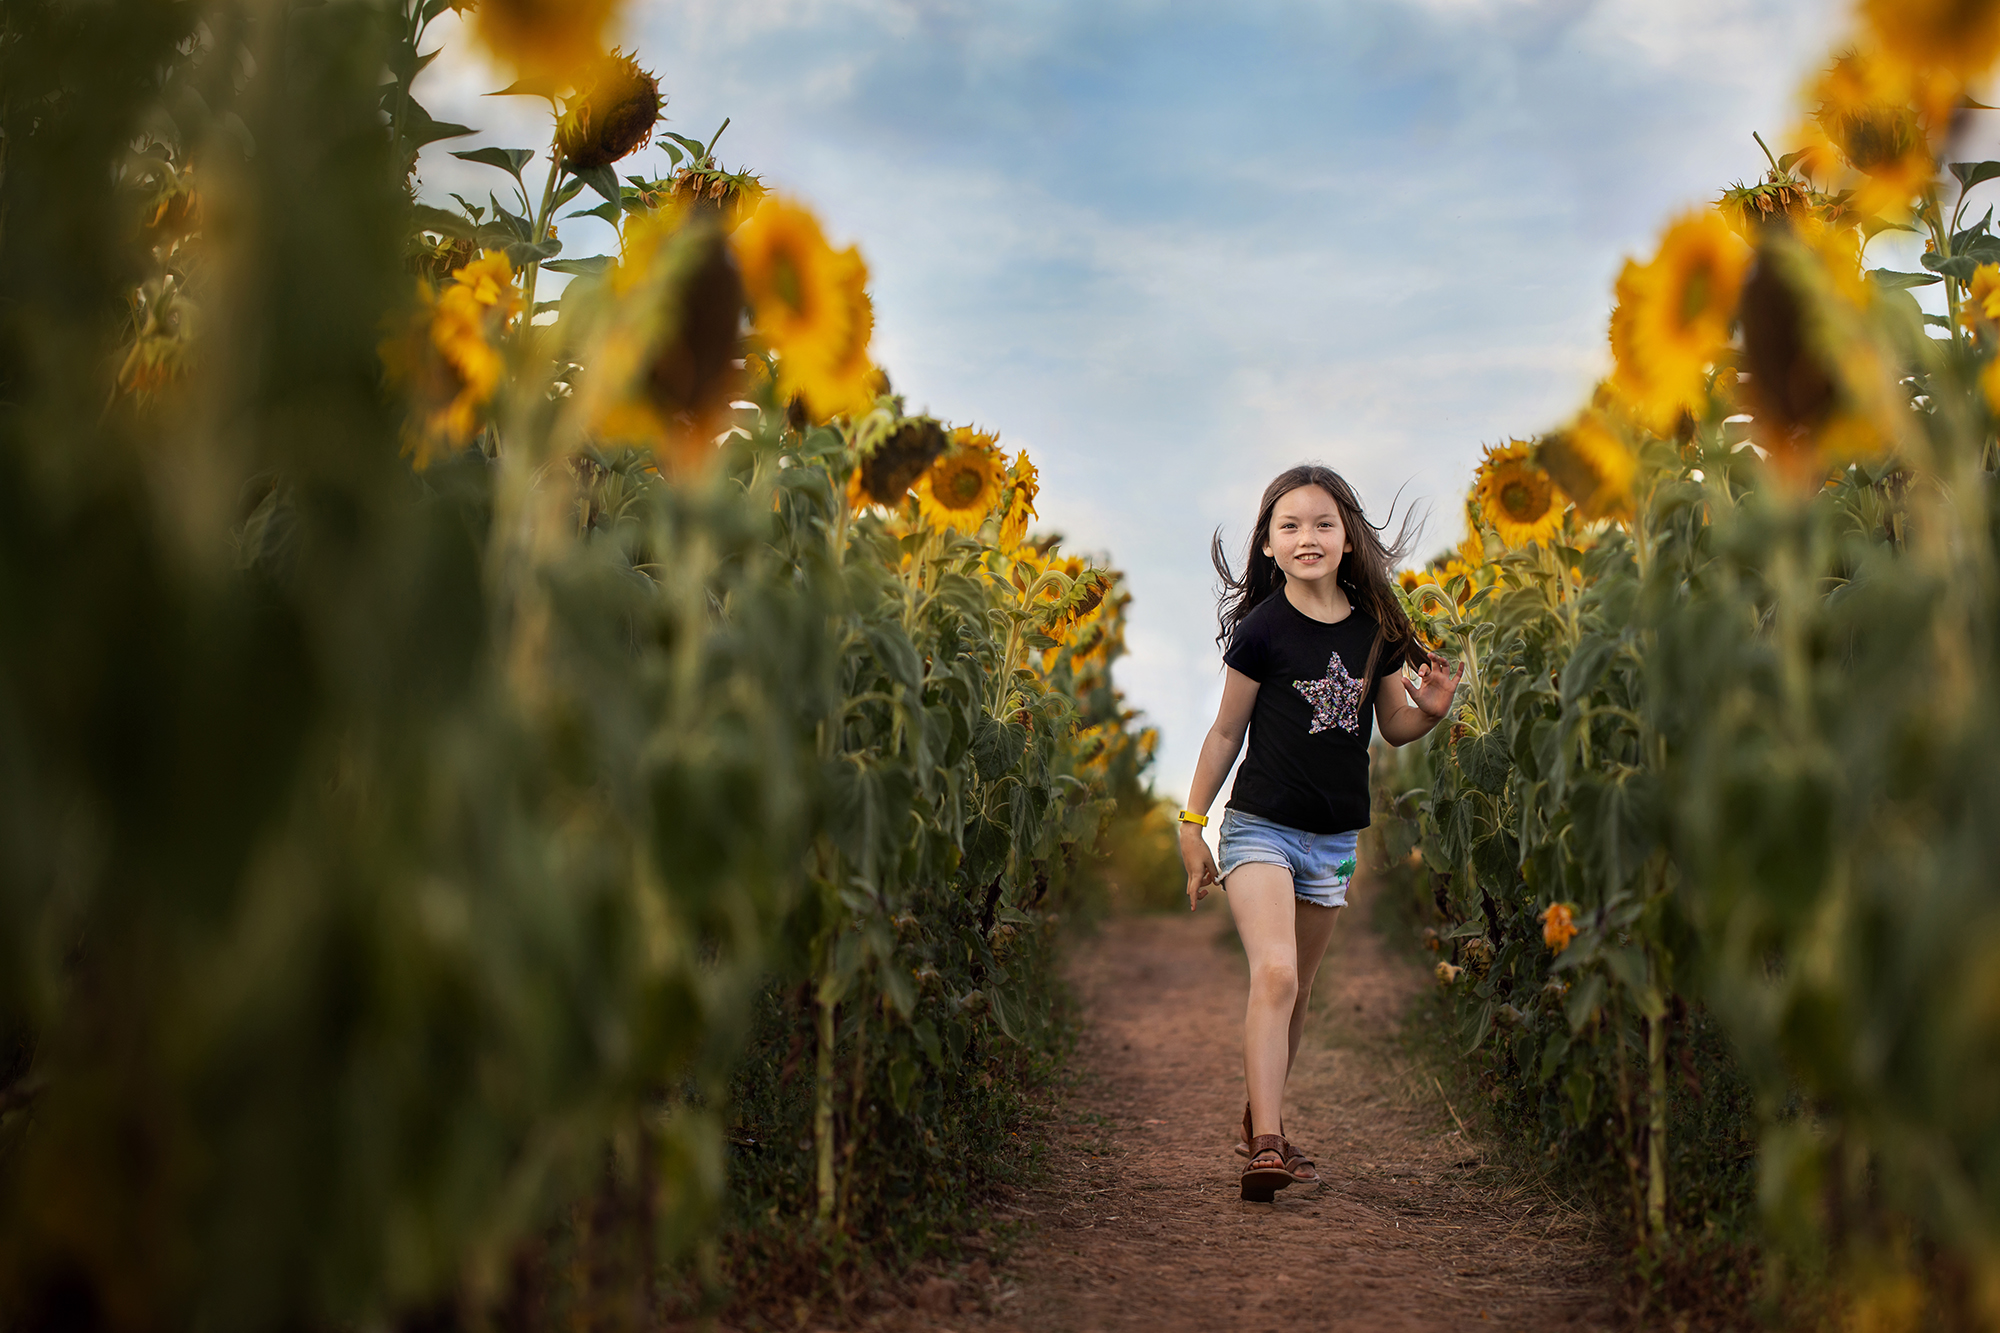 5 Ways to Have Fun with Colour - little girl wallking through field of colourful sunflowers